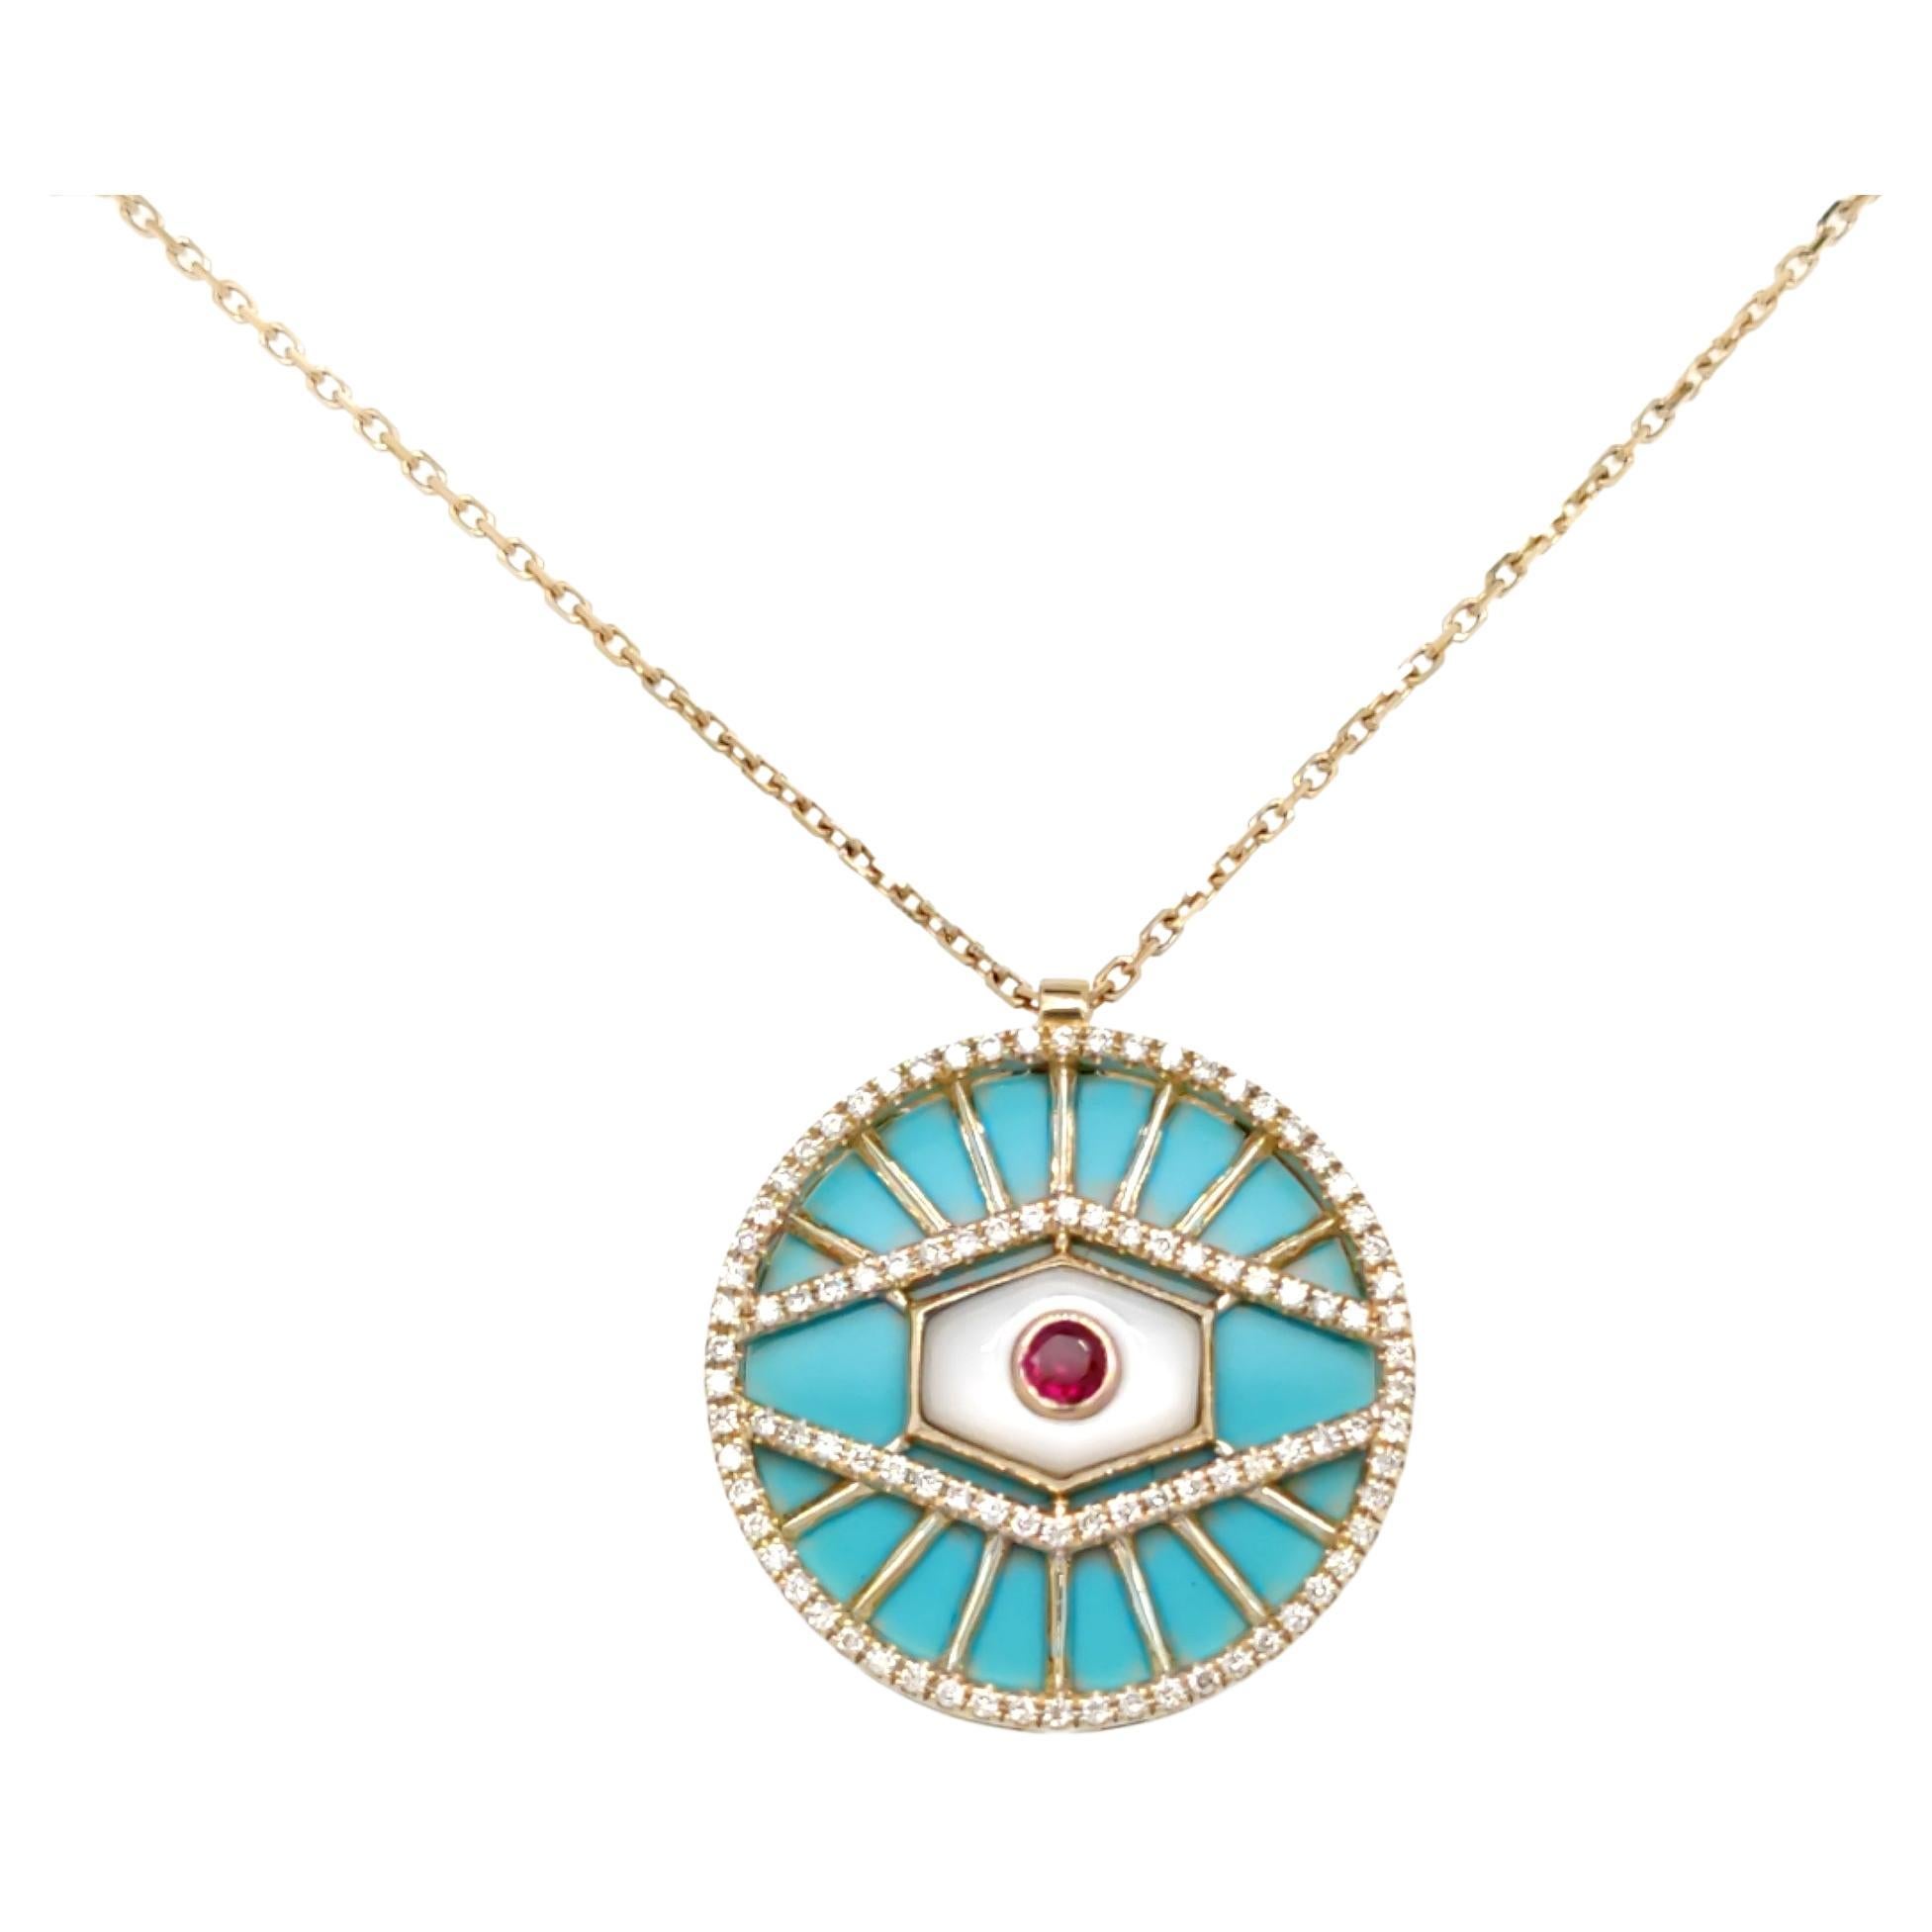 18K Yellow Gold Aqua Blue Evil Eye Diamond Pendant Necklace with Turquoise For Sale